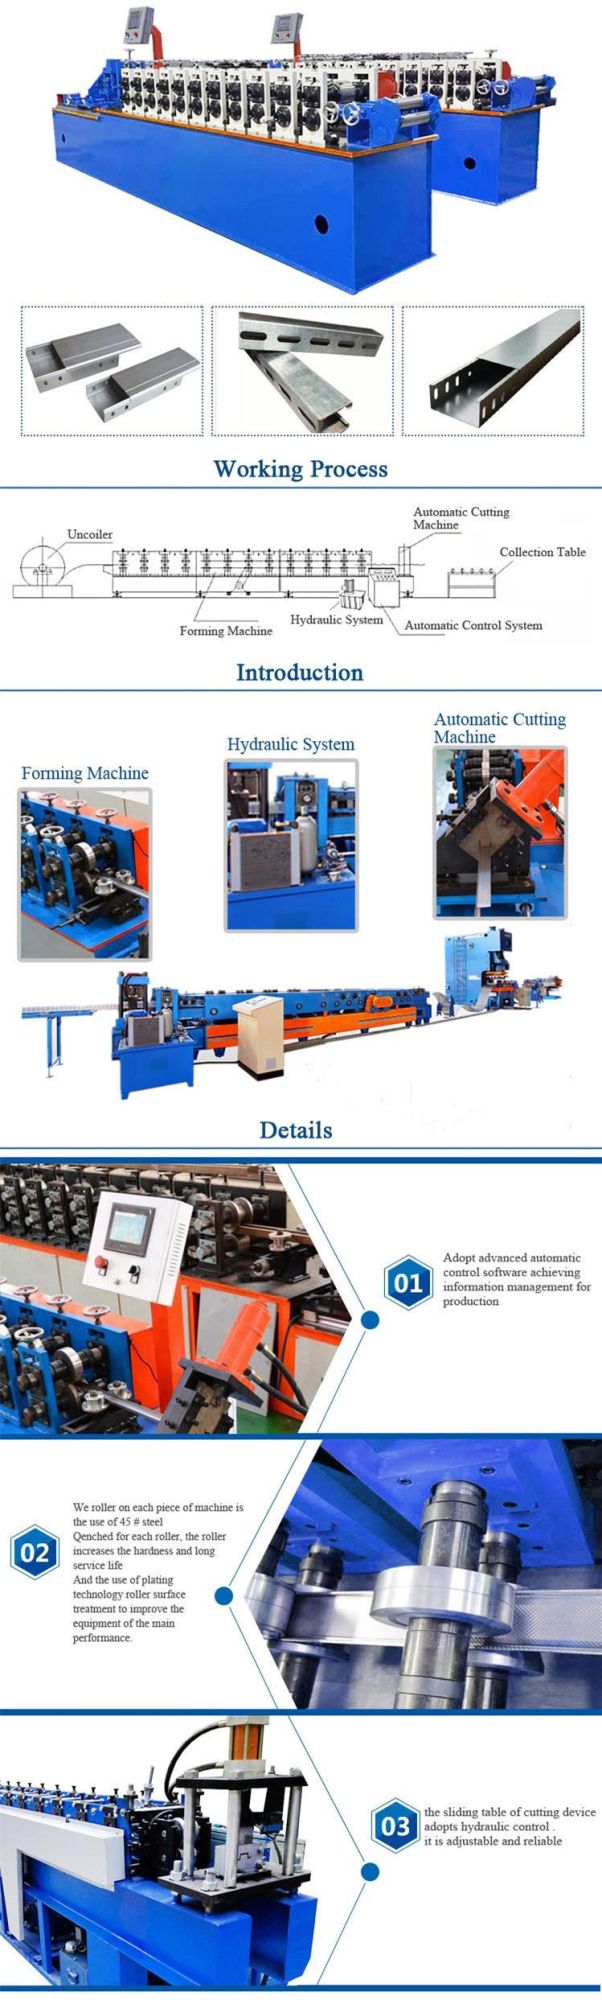 High Efficiency Cable Tray Production Line Roll Forming Machine